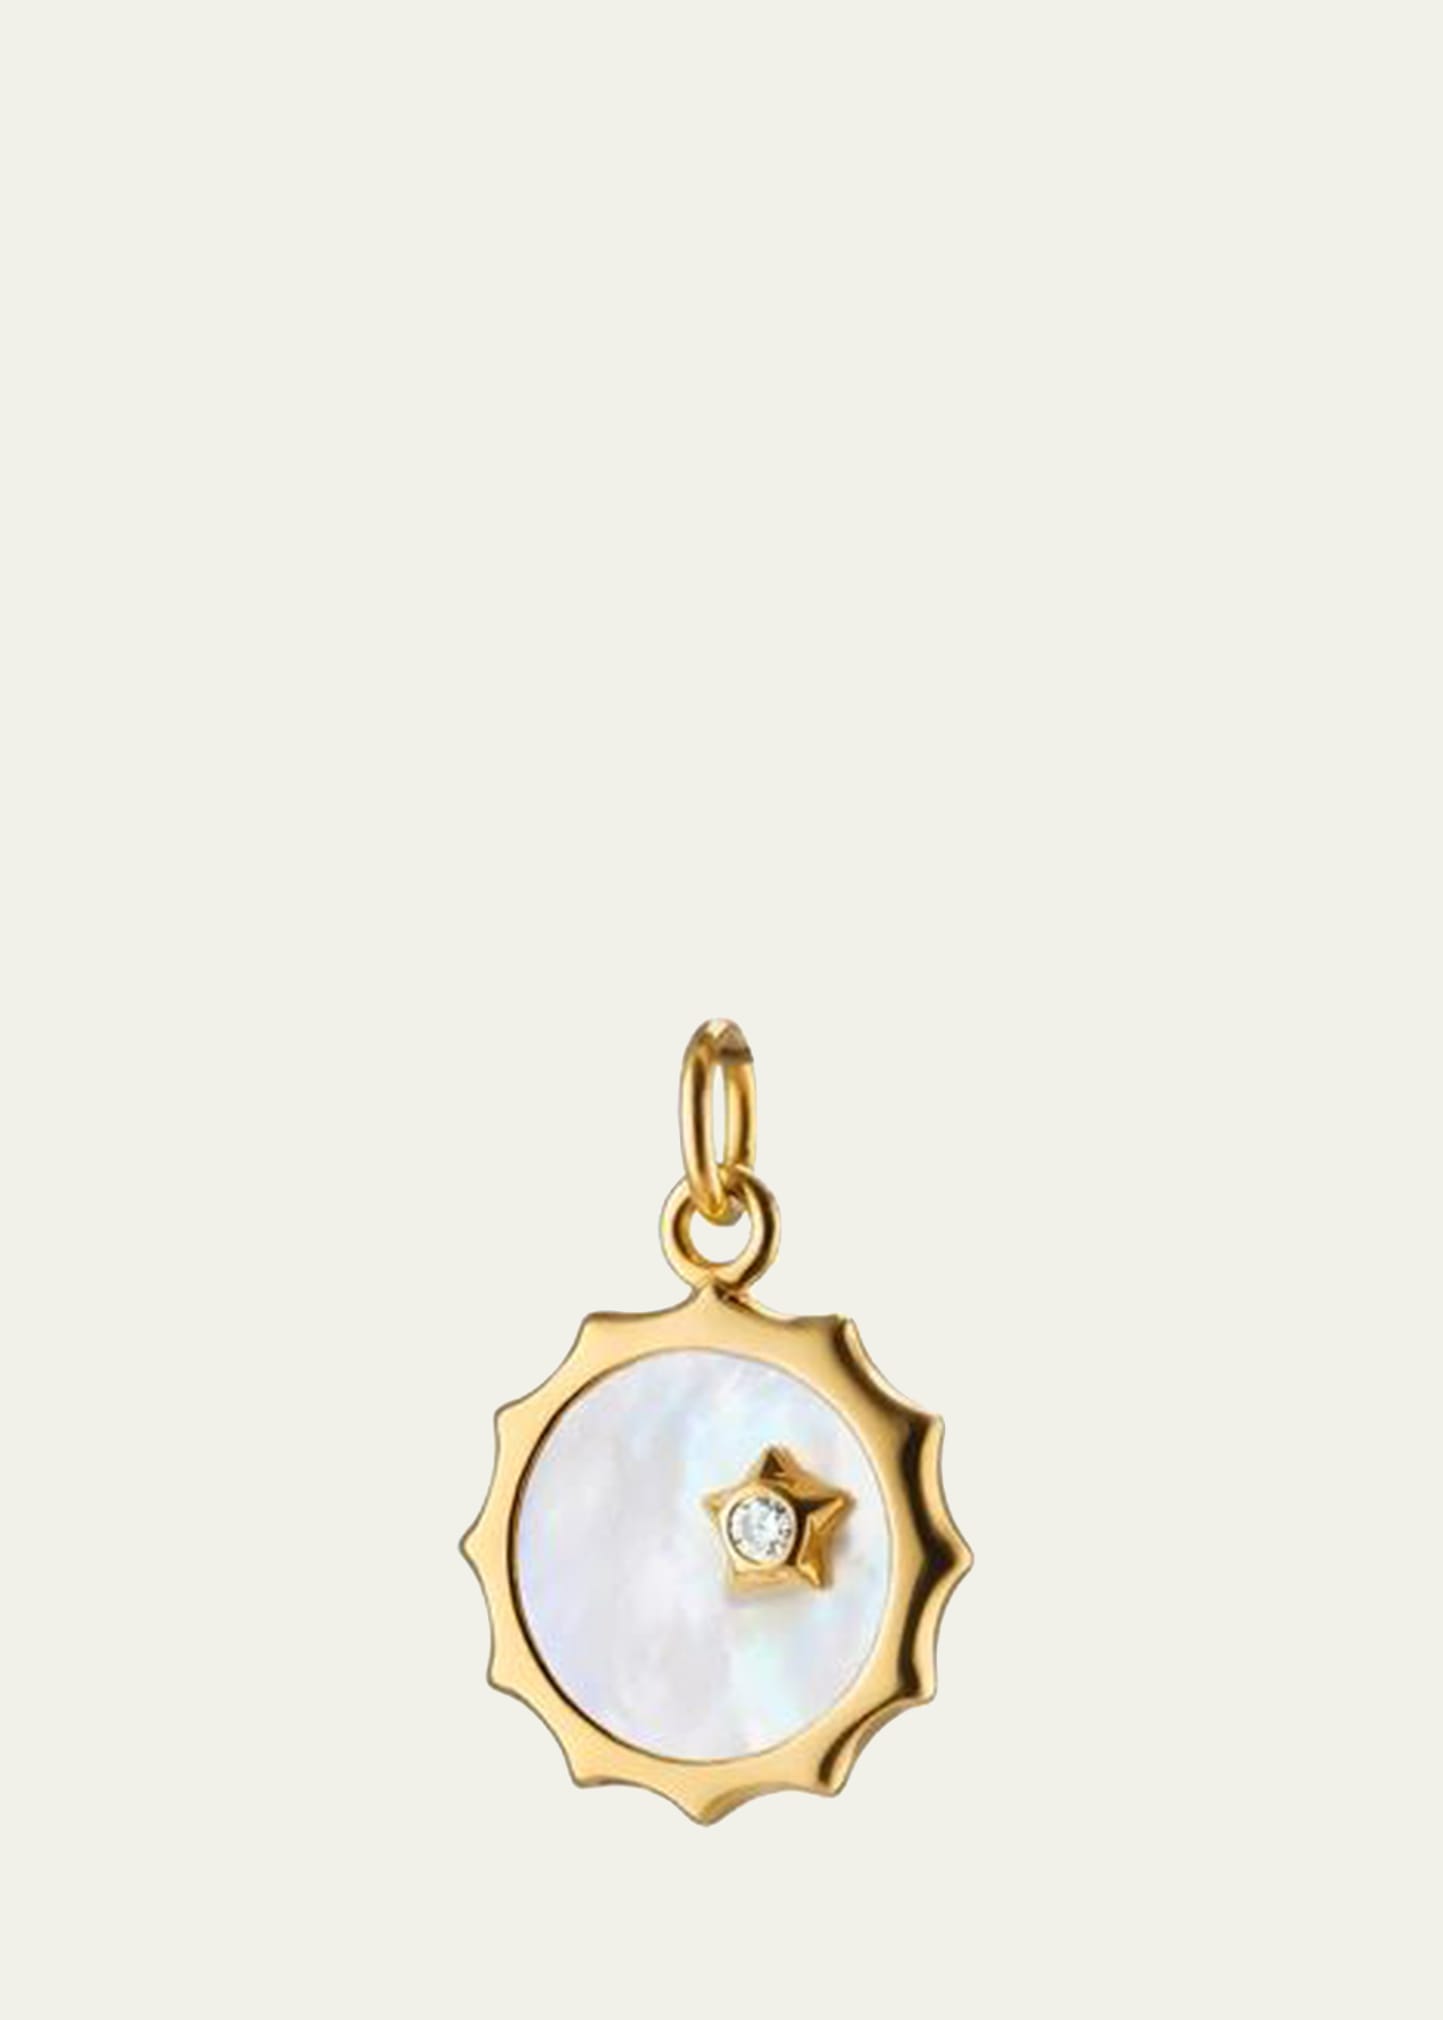 18K Yellow Gold Sun Shaped Pendant With White Mop And Accent Star Bezel Set Diamond